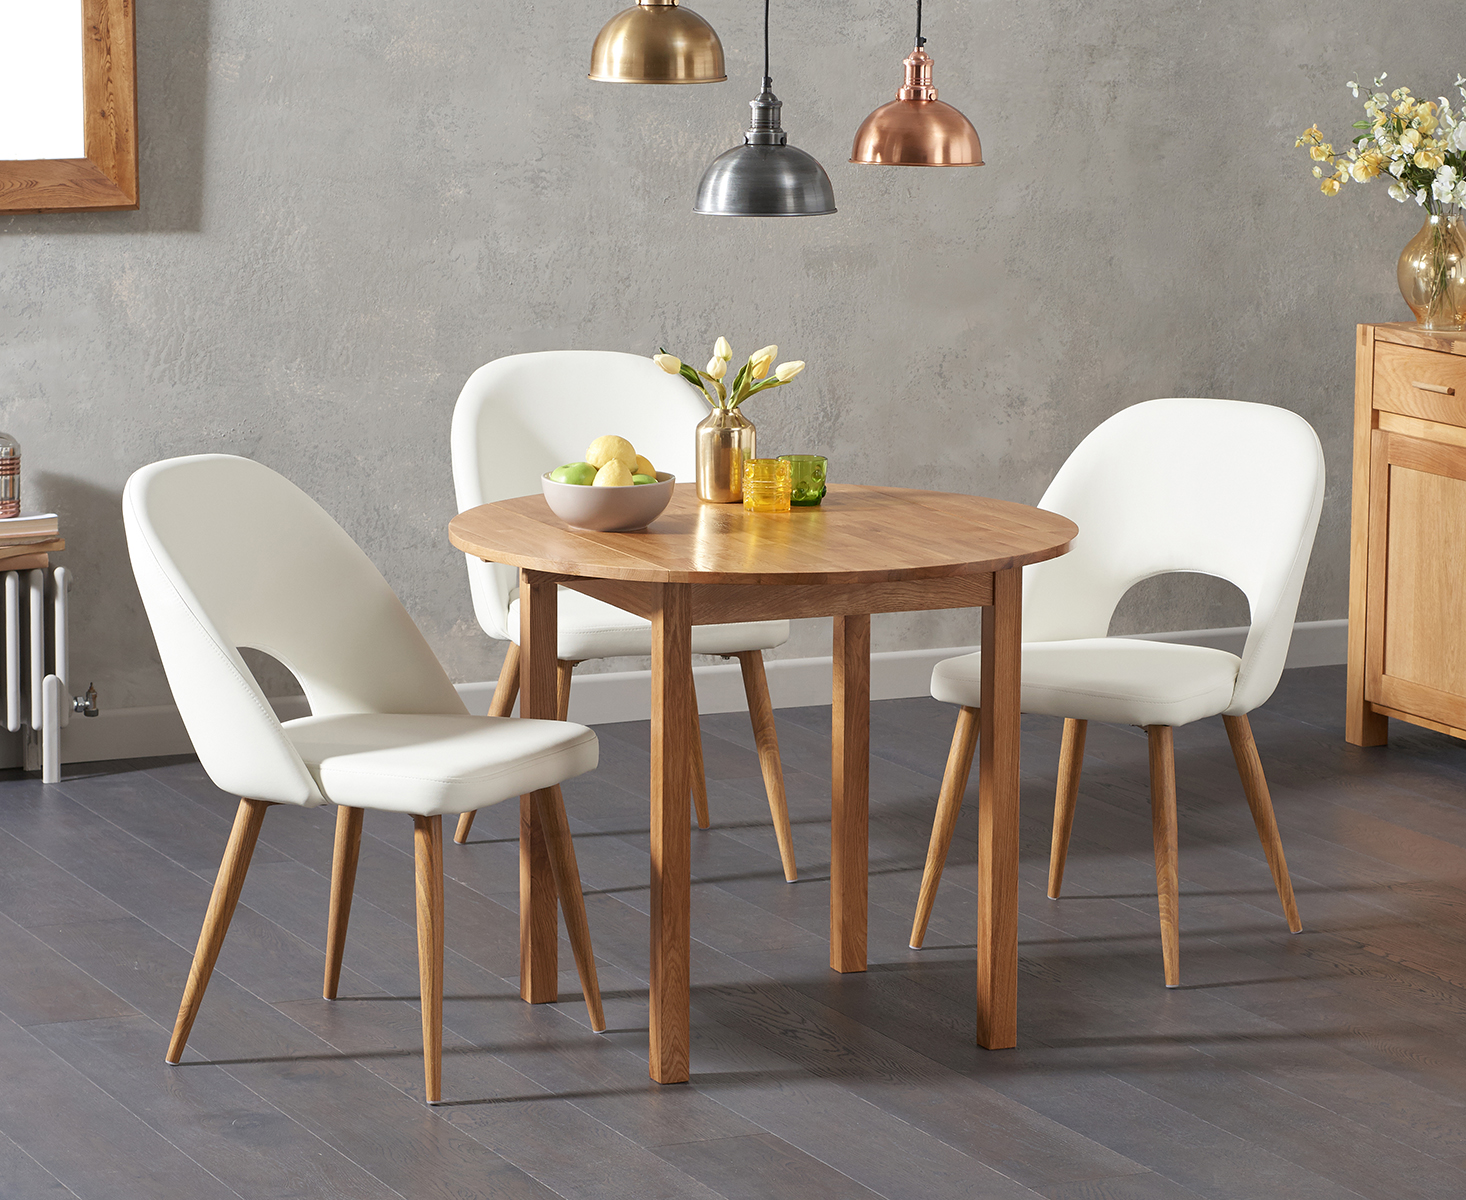 Oxford 90cm Solid Oak Drop Leaf Extending Dining Table With 4 Grey Hudson Faux Leather Chairs